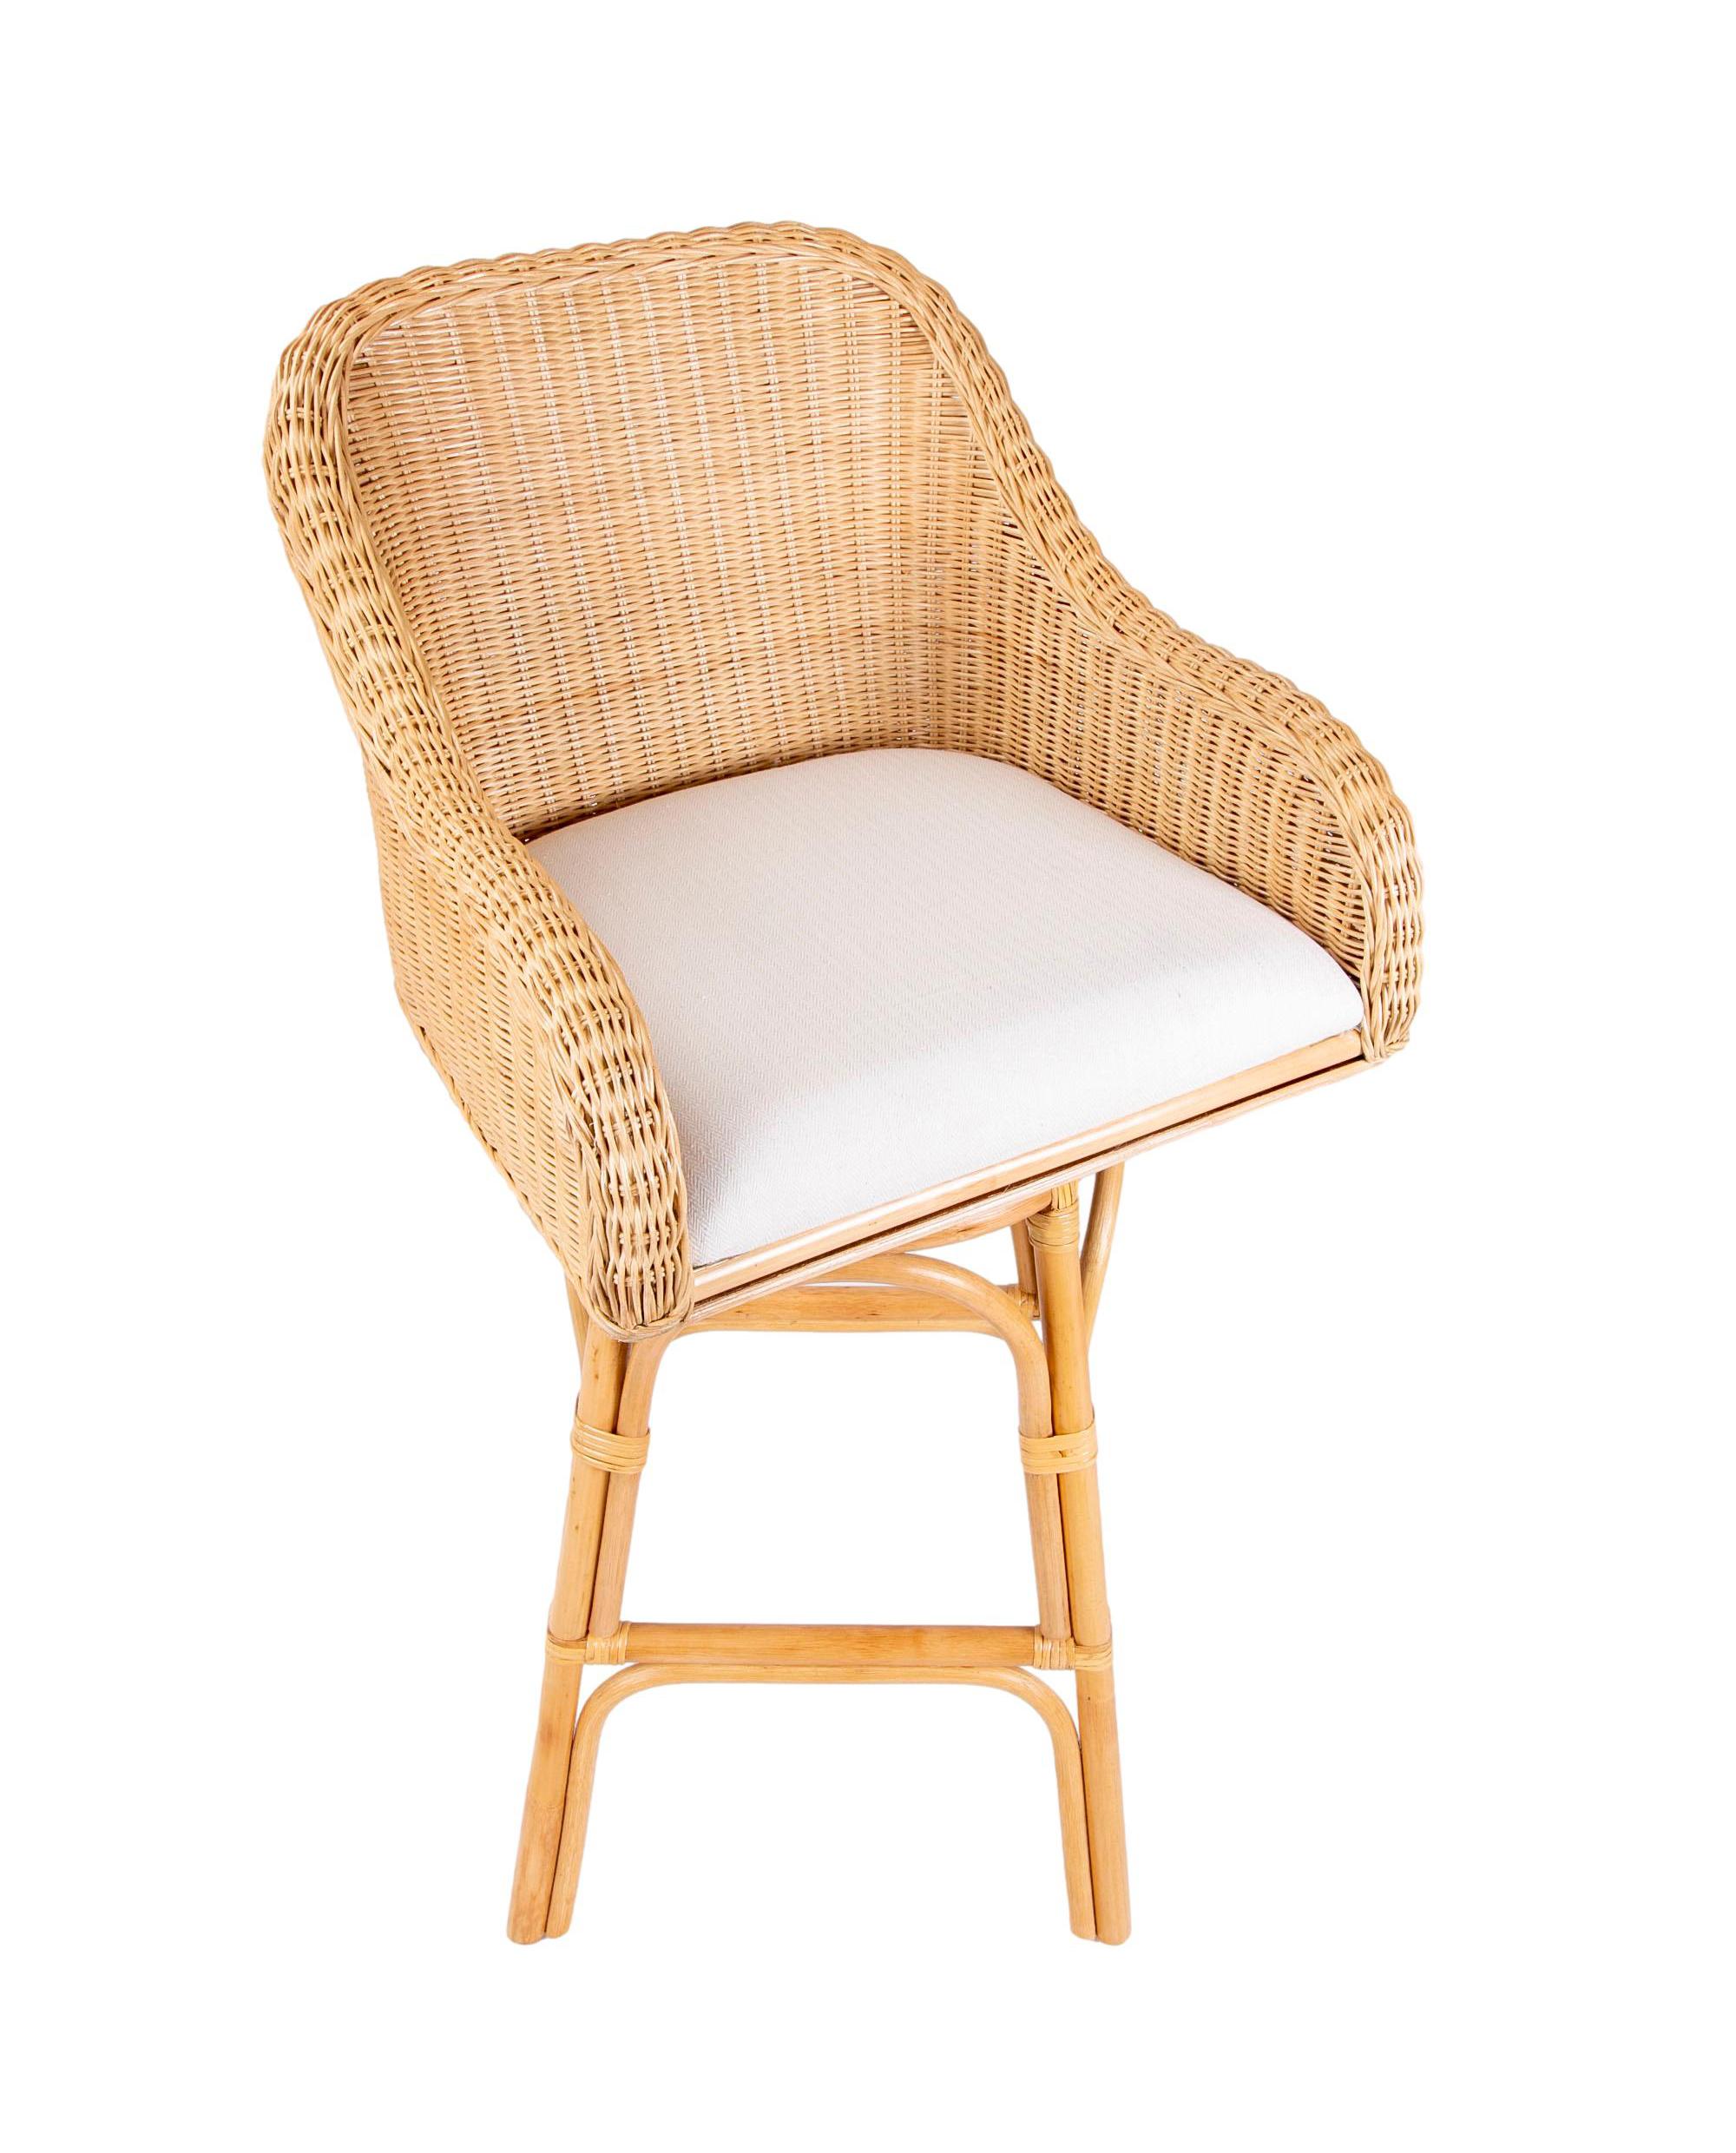 Upholstered Rattan and Wicker Bar stool with Sideways Movement 5